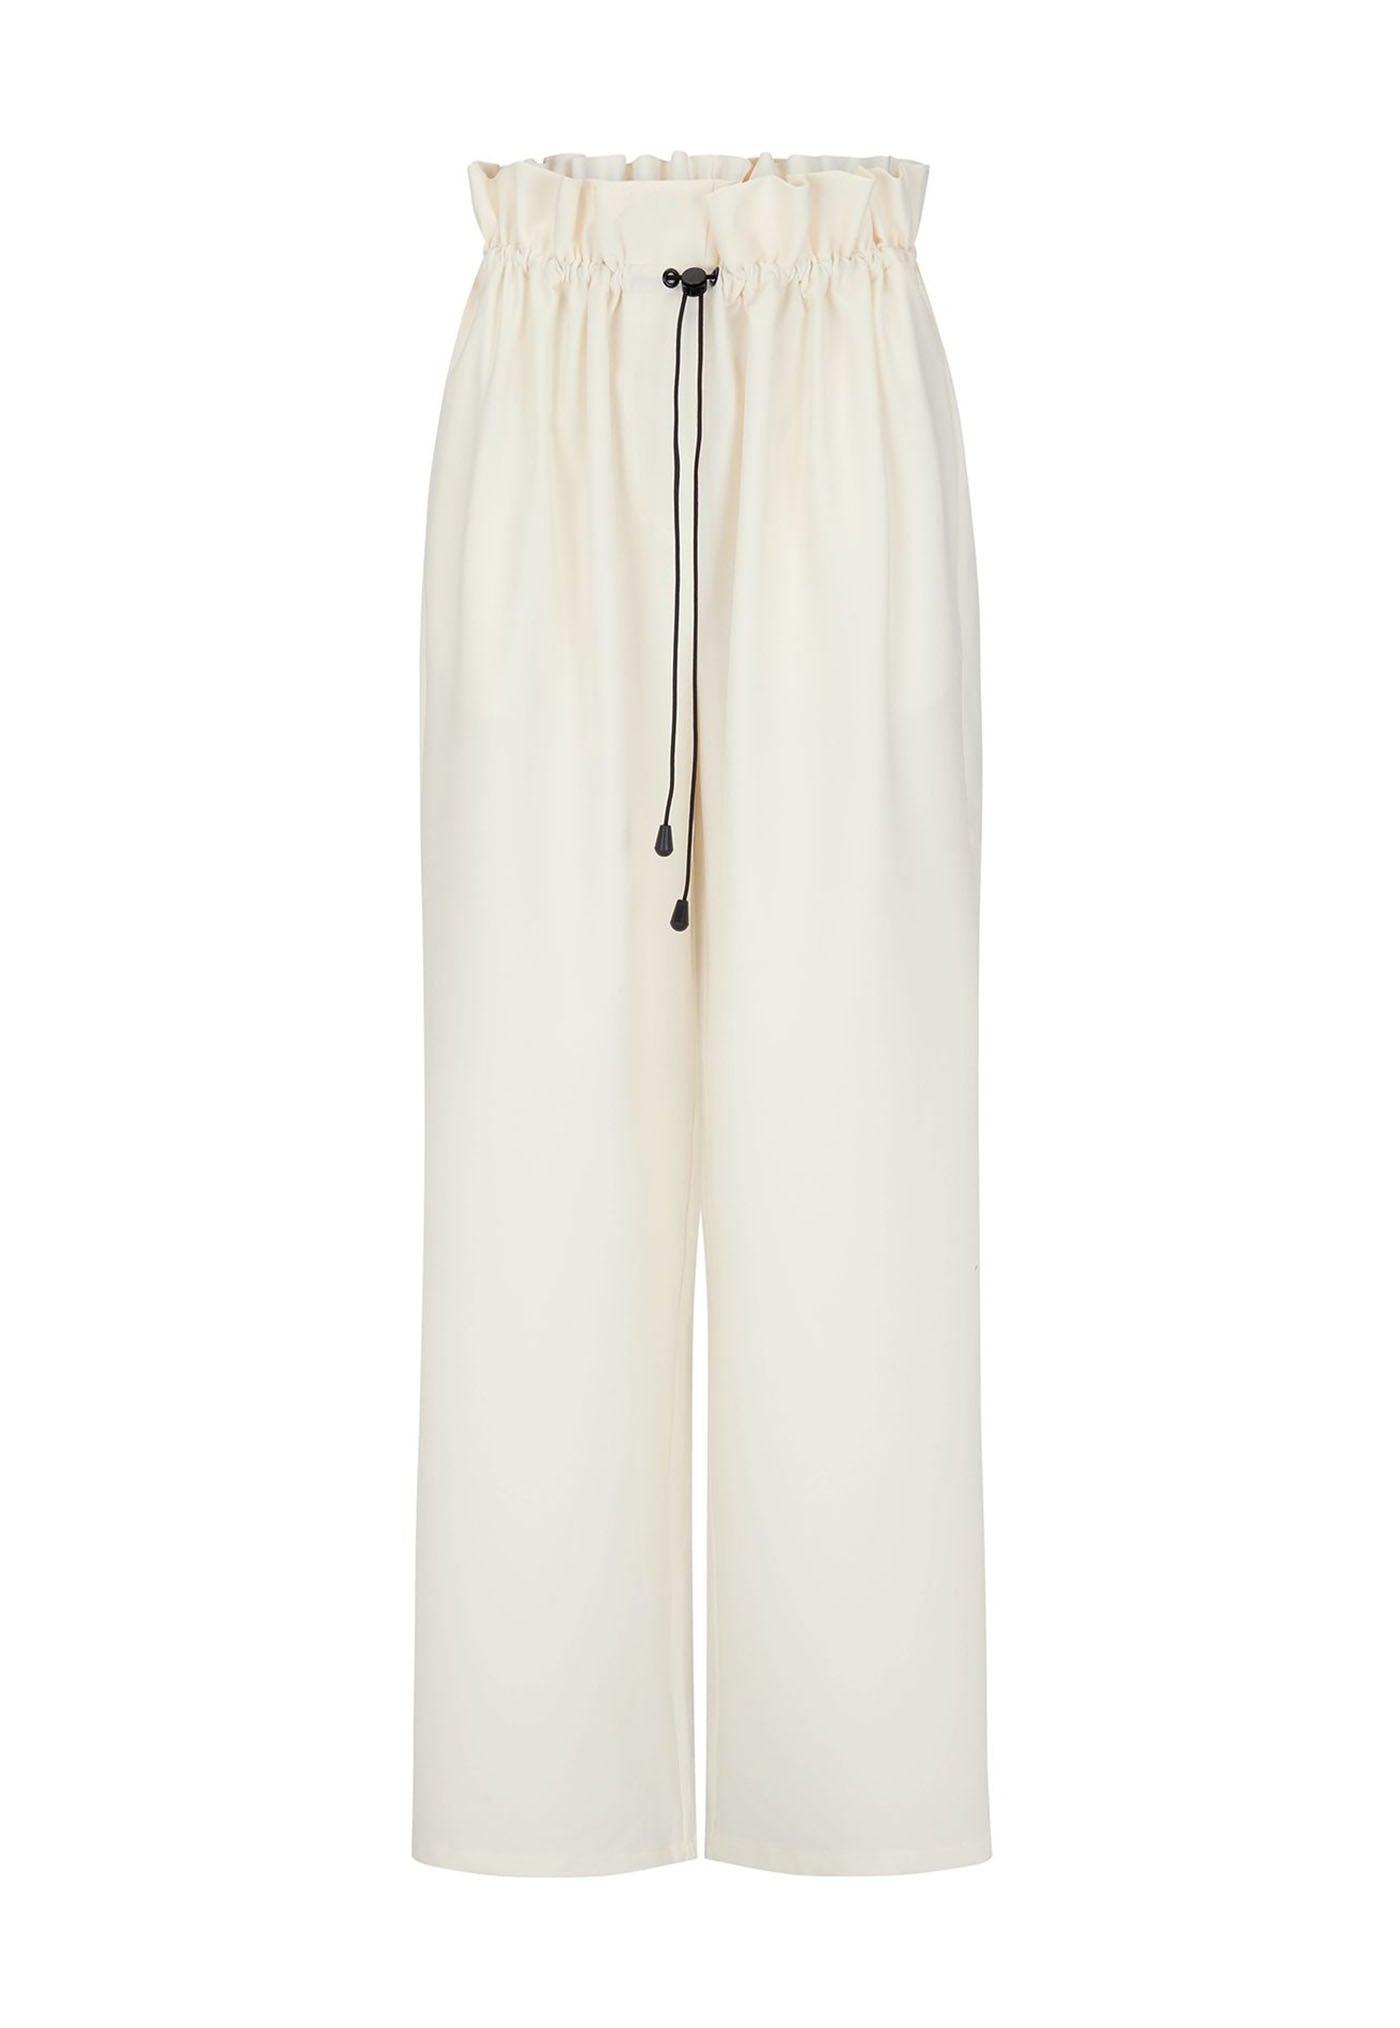 Sherman Trouser - Ivory sold by Angel Divine